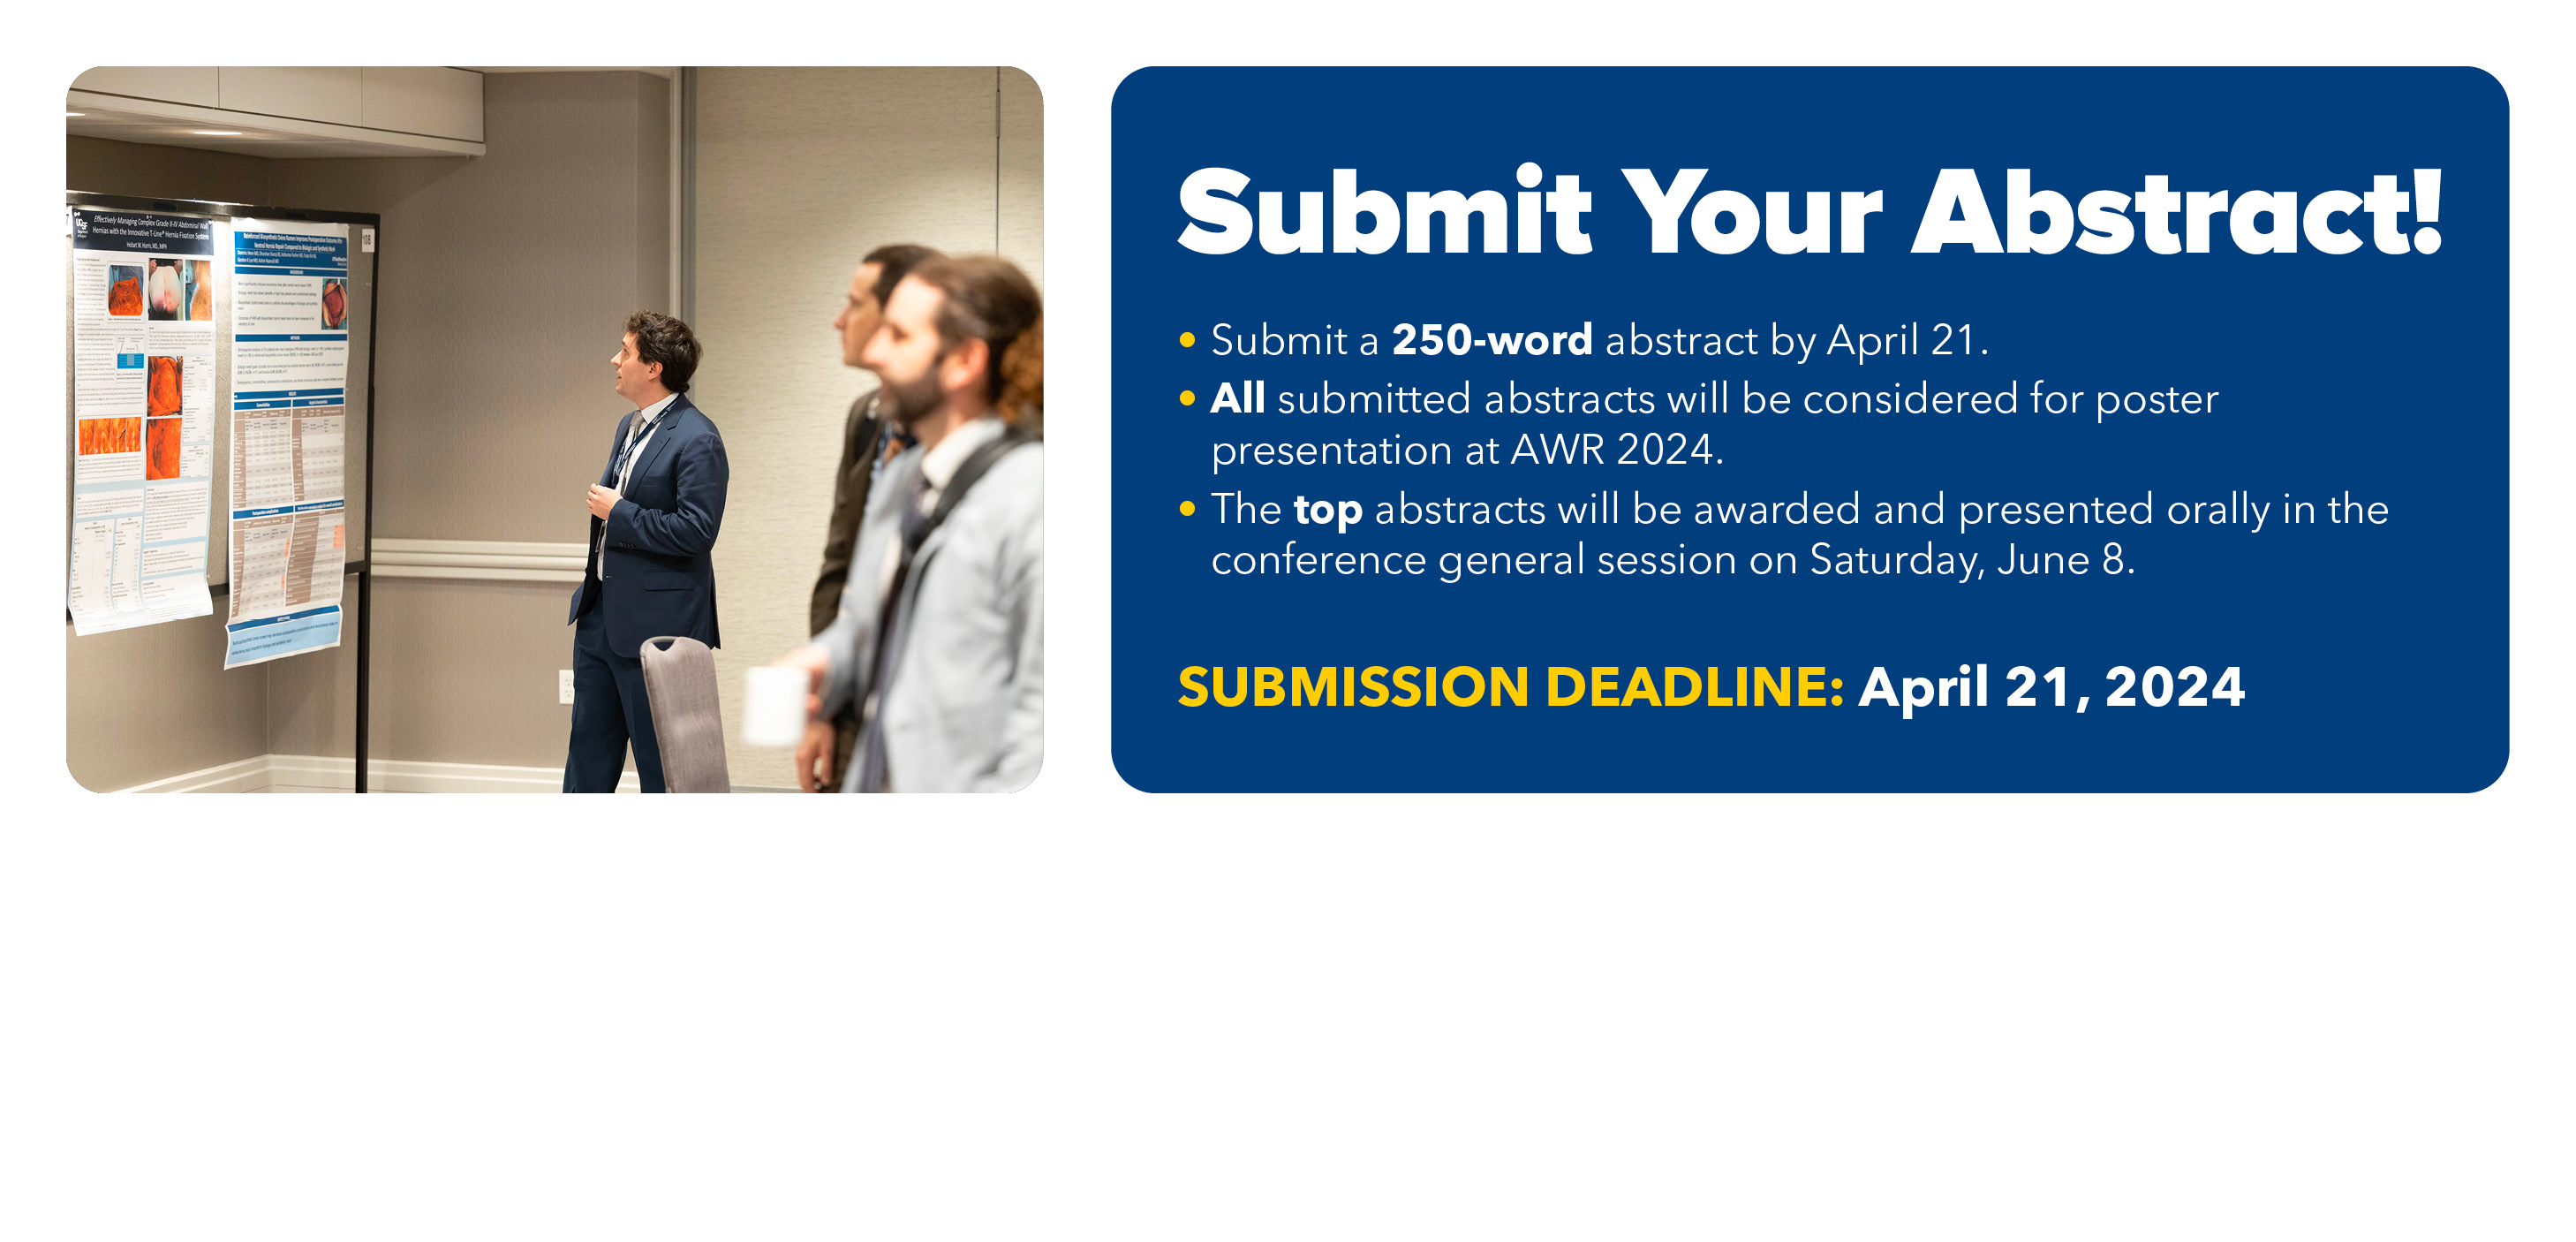 Submit Your Abstract